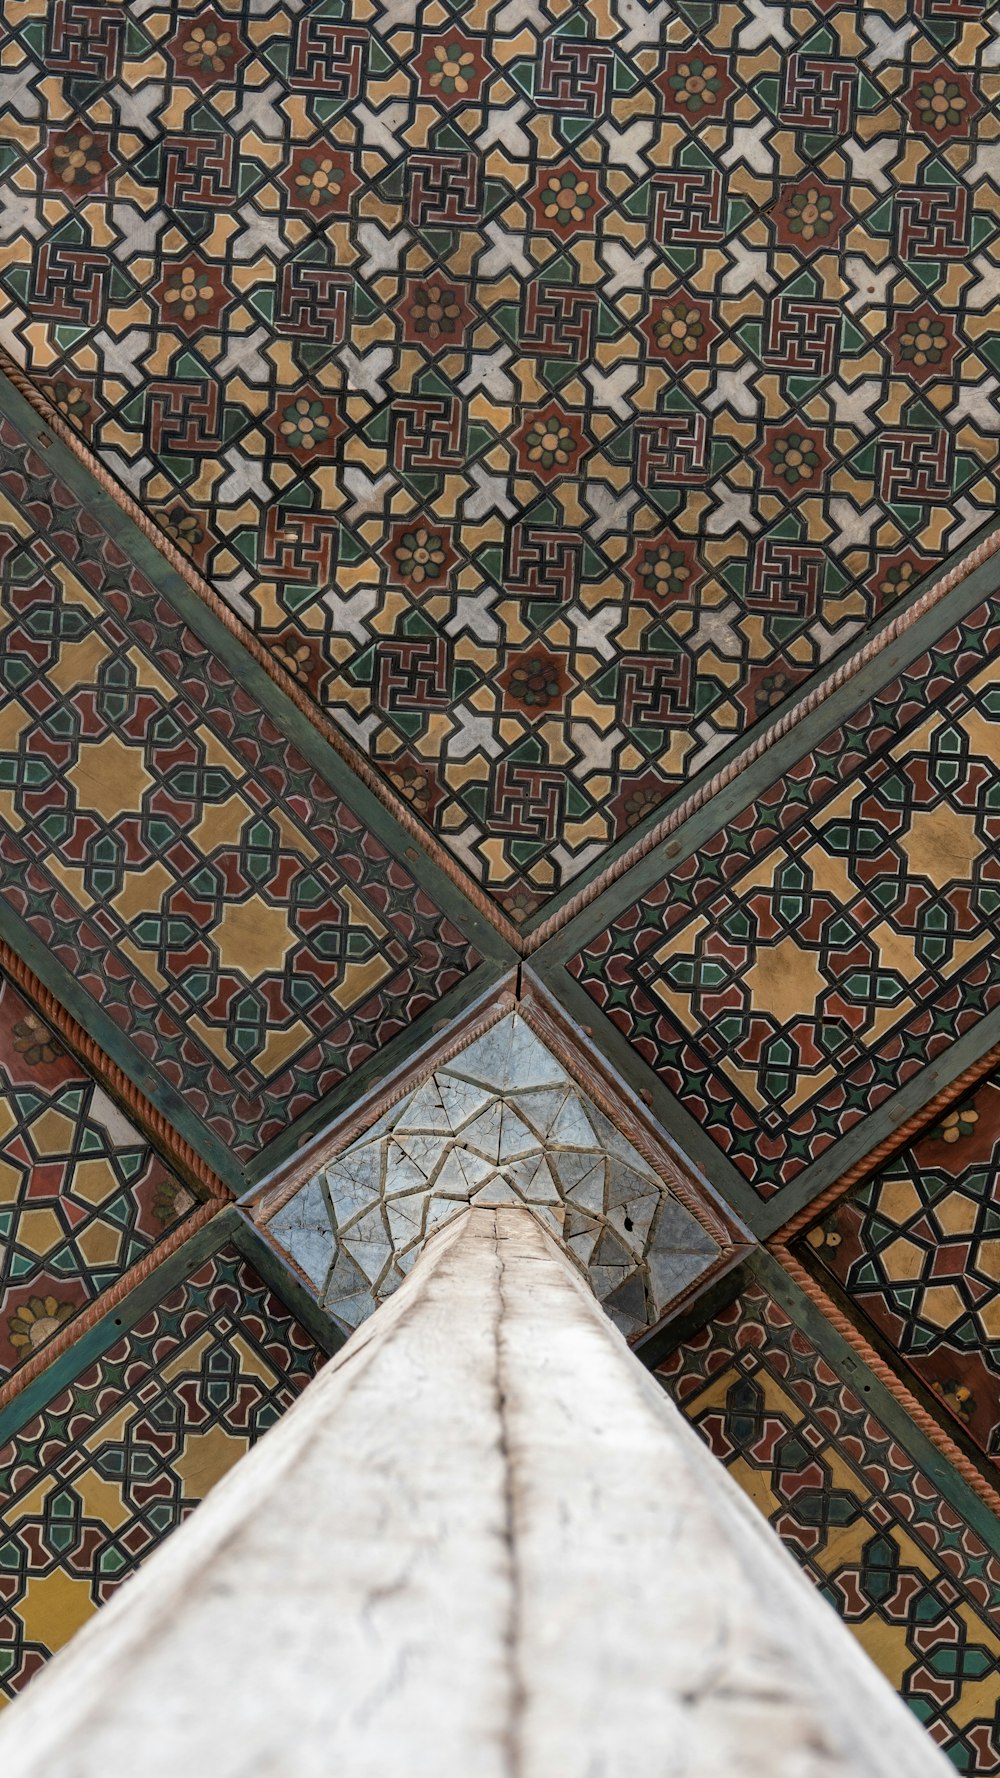 a close up view of a tiled ceiling